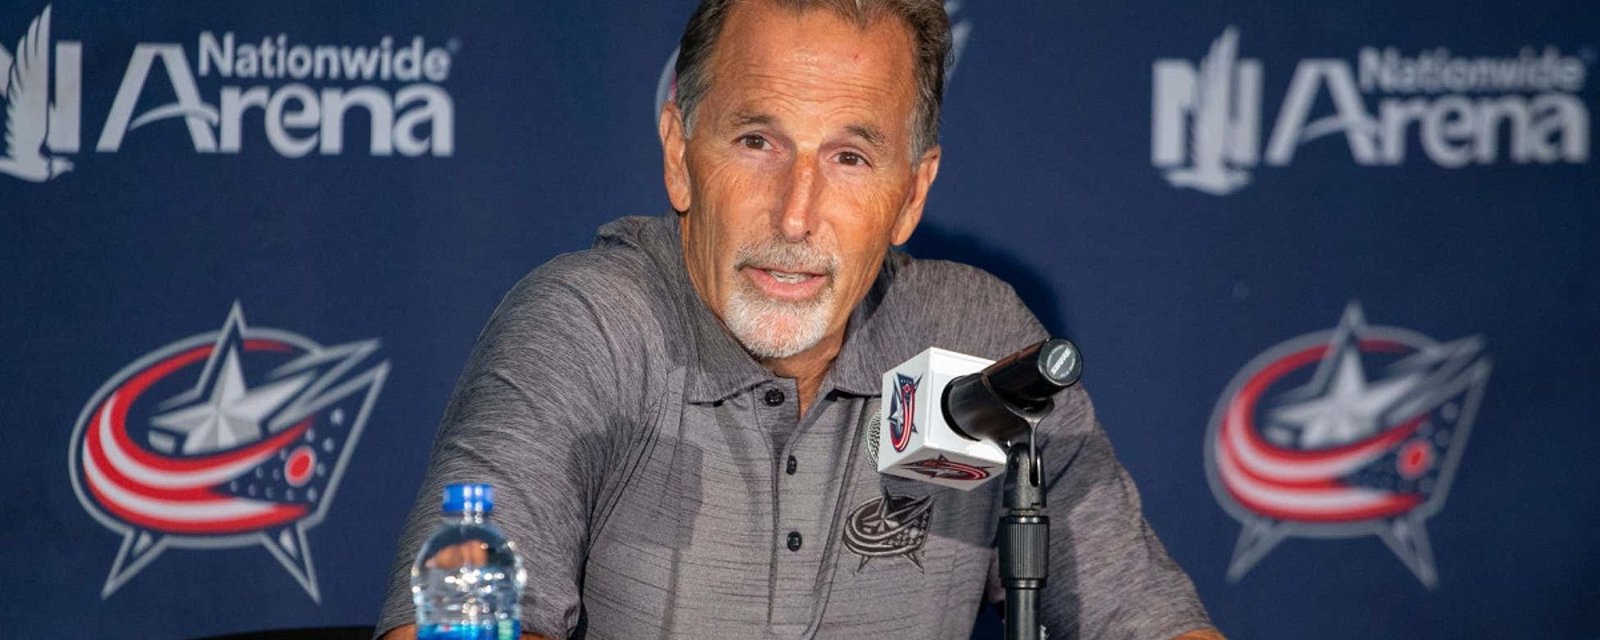 John Tortorella responds to today's officiating controversy.